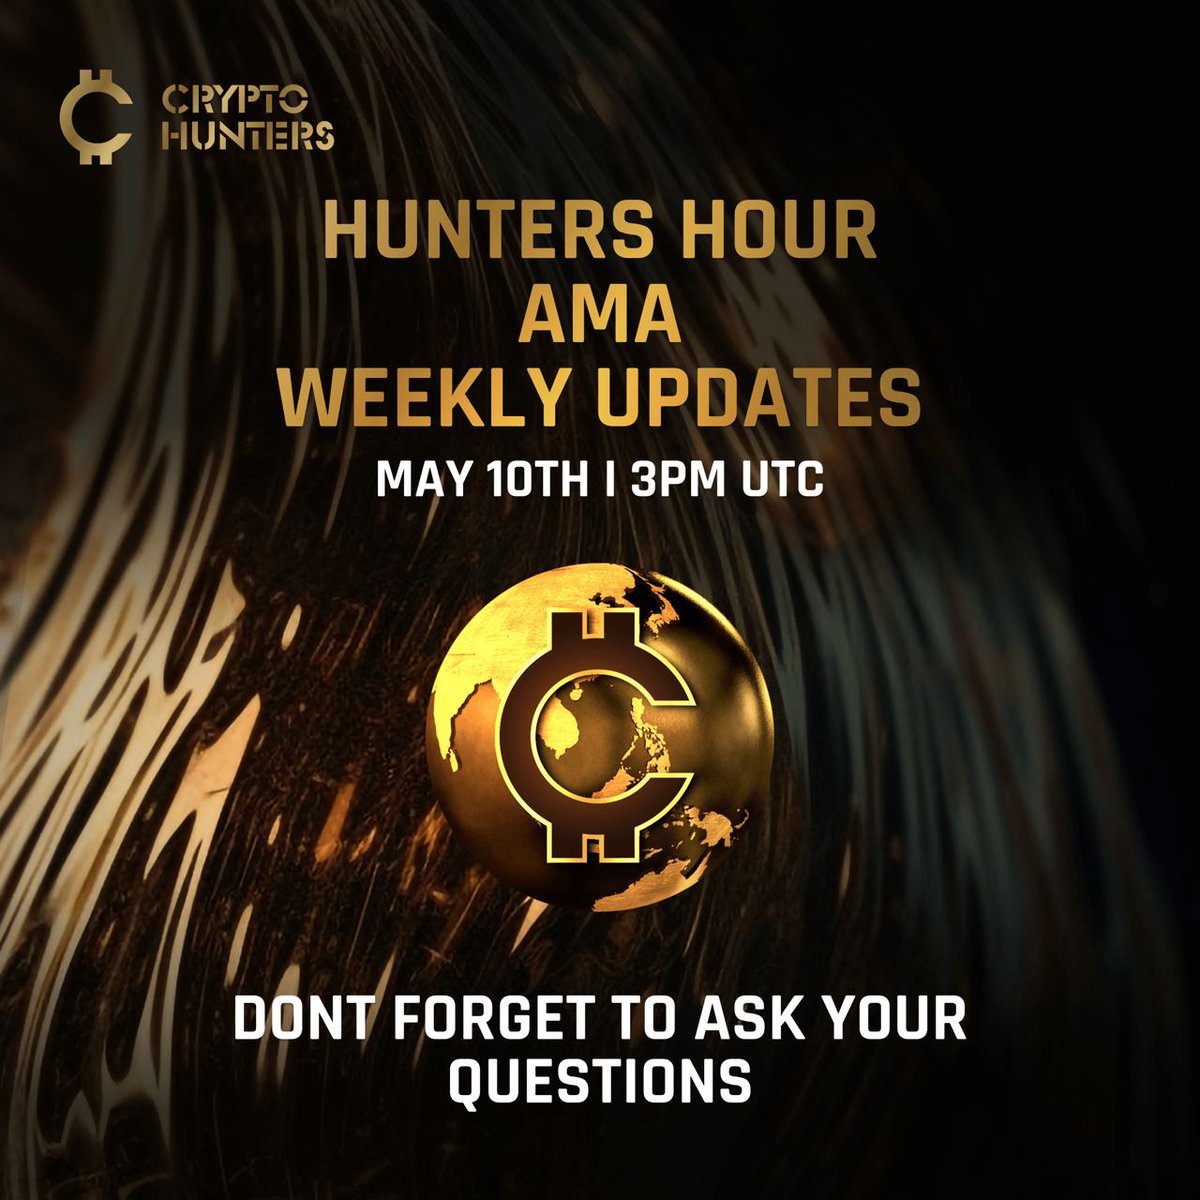 🚀We are Live in 1 Hour🚀

Join us LIVE for Crypto Hunters: Hunters Hour in ONE HOUR at 3PM UTC 🎉

Tune in for today to get exciting updates!

youtube.com/live/0UQlAUebf…

#CryptoHuntersHour #JoinTheHunt